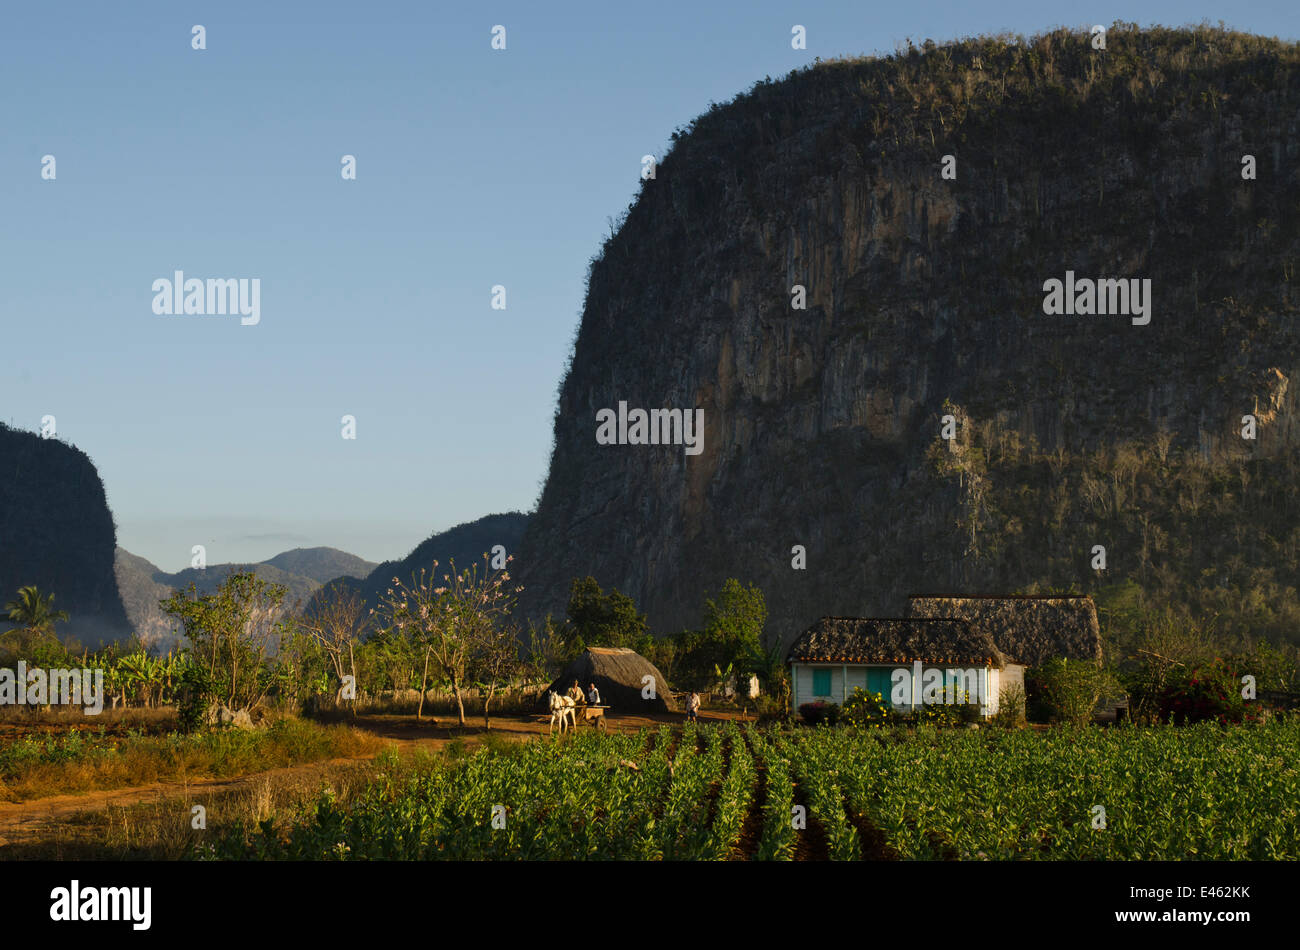 Viales Valley with Tobacco crop, Sierra Rosario Mountain Range with Mojotes (limestone tree-covered knolls) UNESCO World Heritage site, Cuba, Caribbean, 2011 Stock Photo